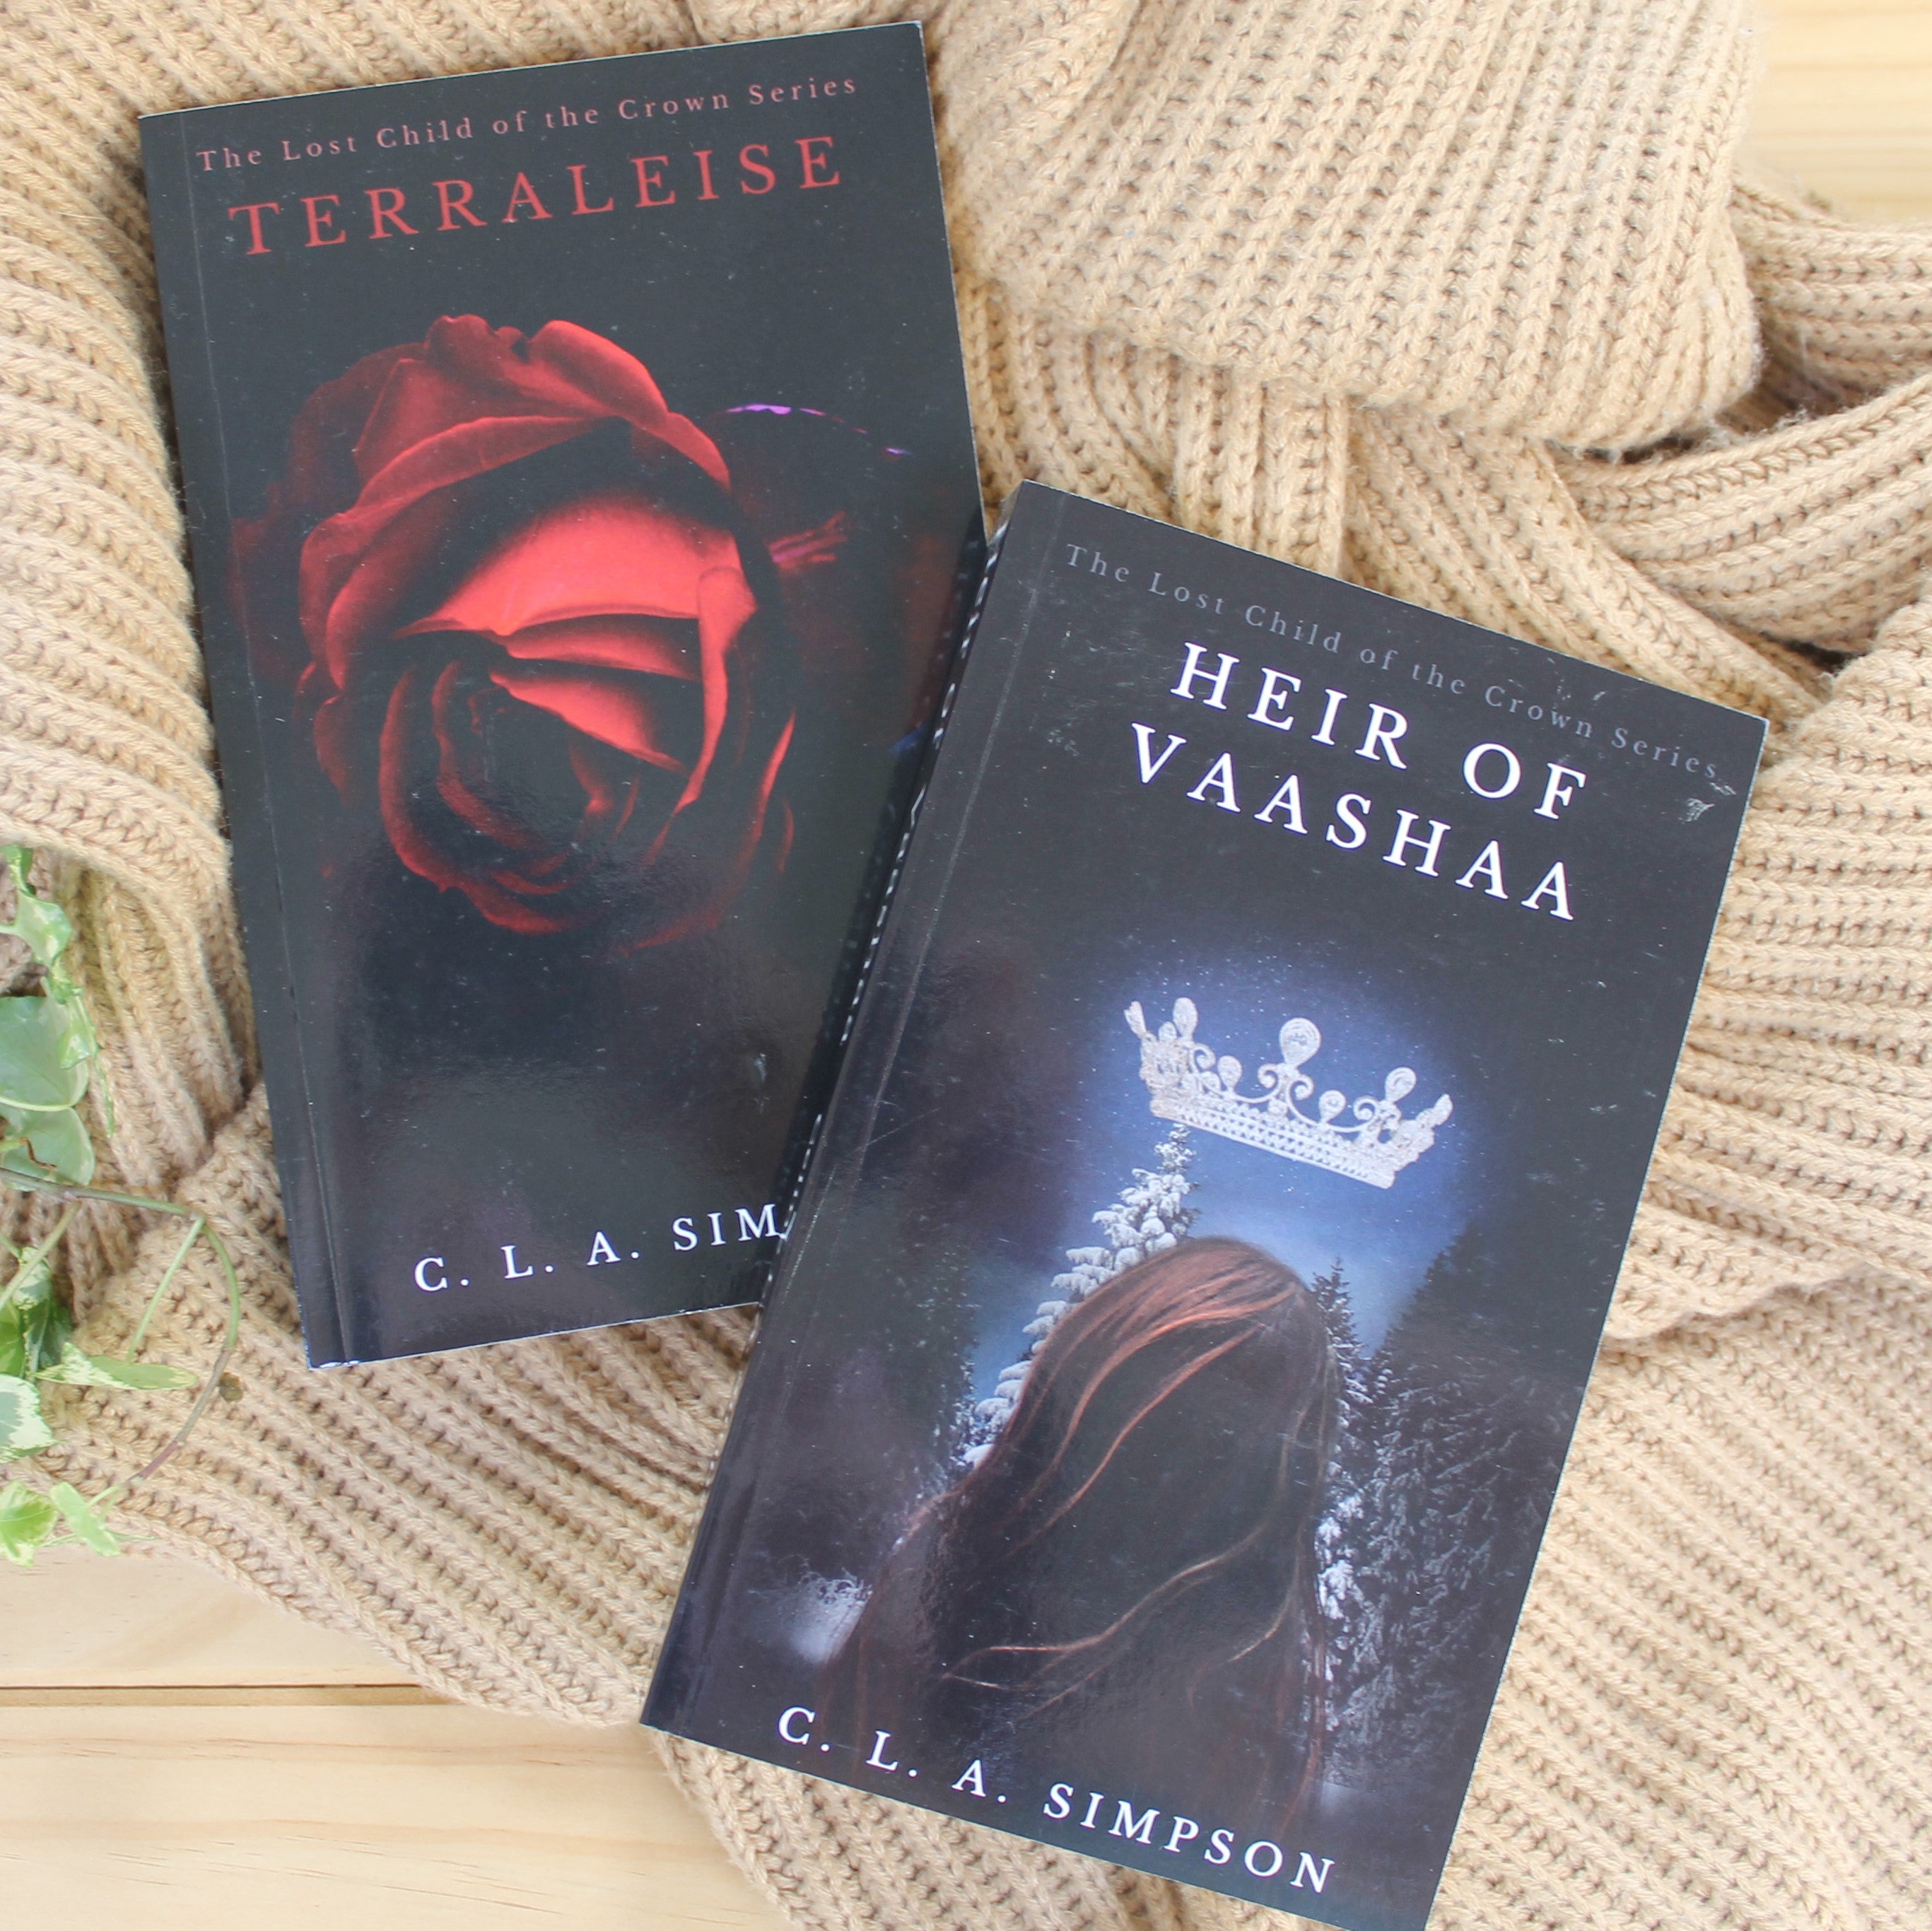 The Lost Child of the Crown series by Celine L.A. Simpson